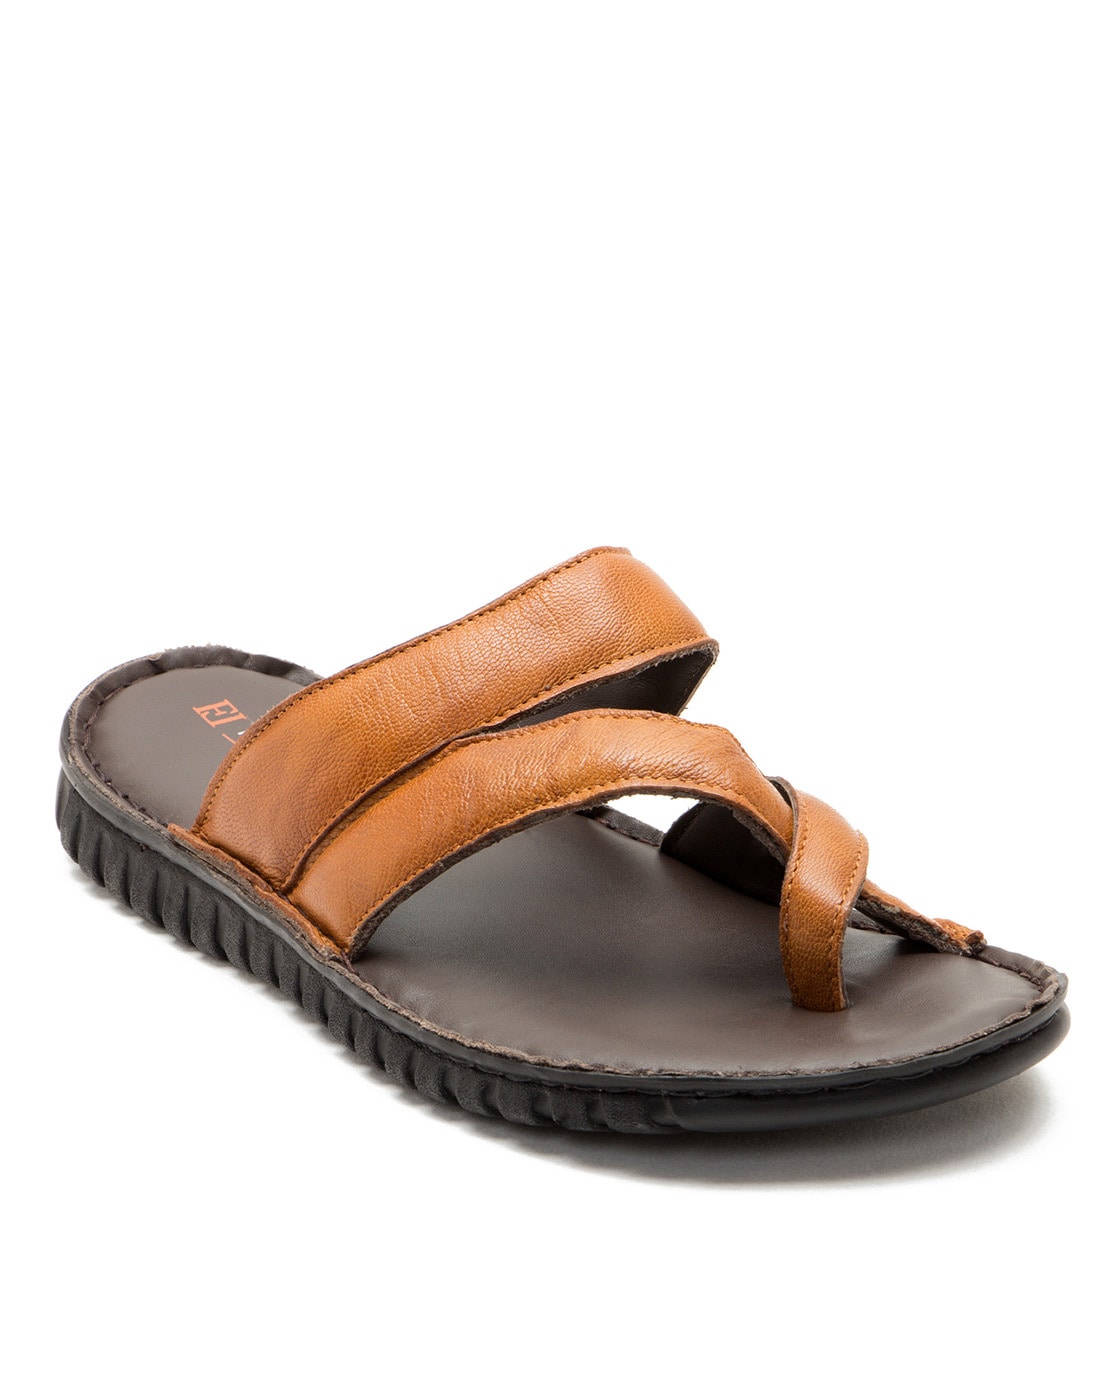 Buy Franco Leone Men's Tan Leather Flip-Flops Online at Lowest Price Ever  in India | Check Reviews & Ratings - Shop The World